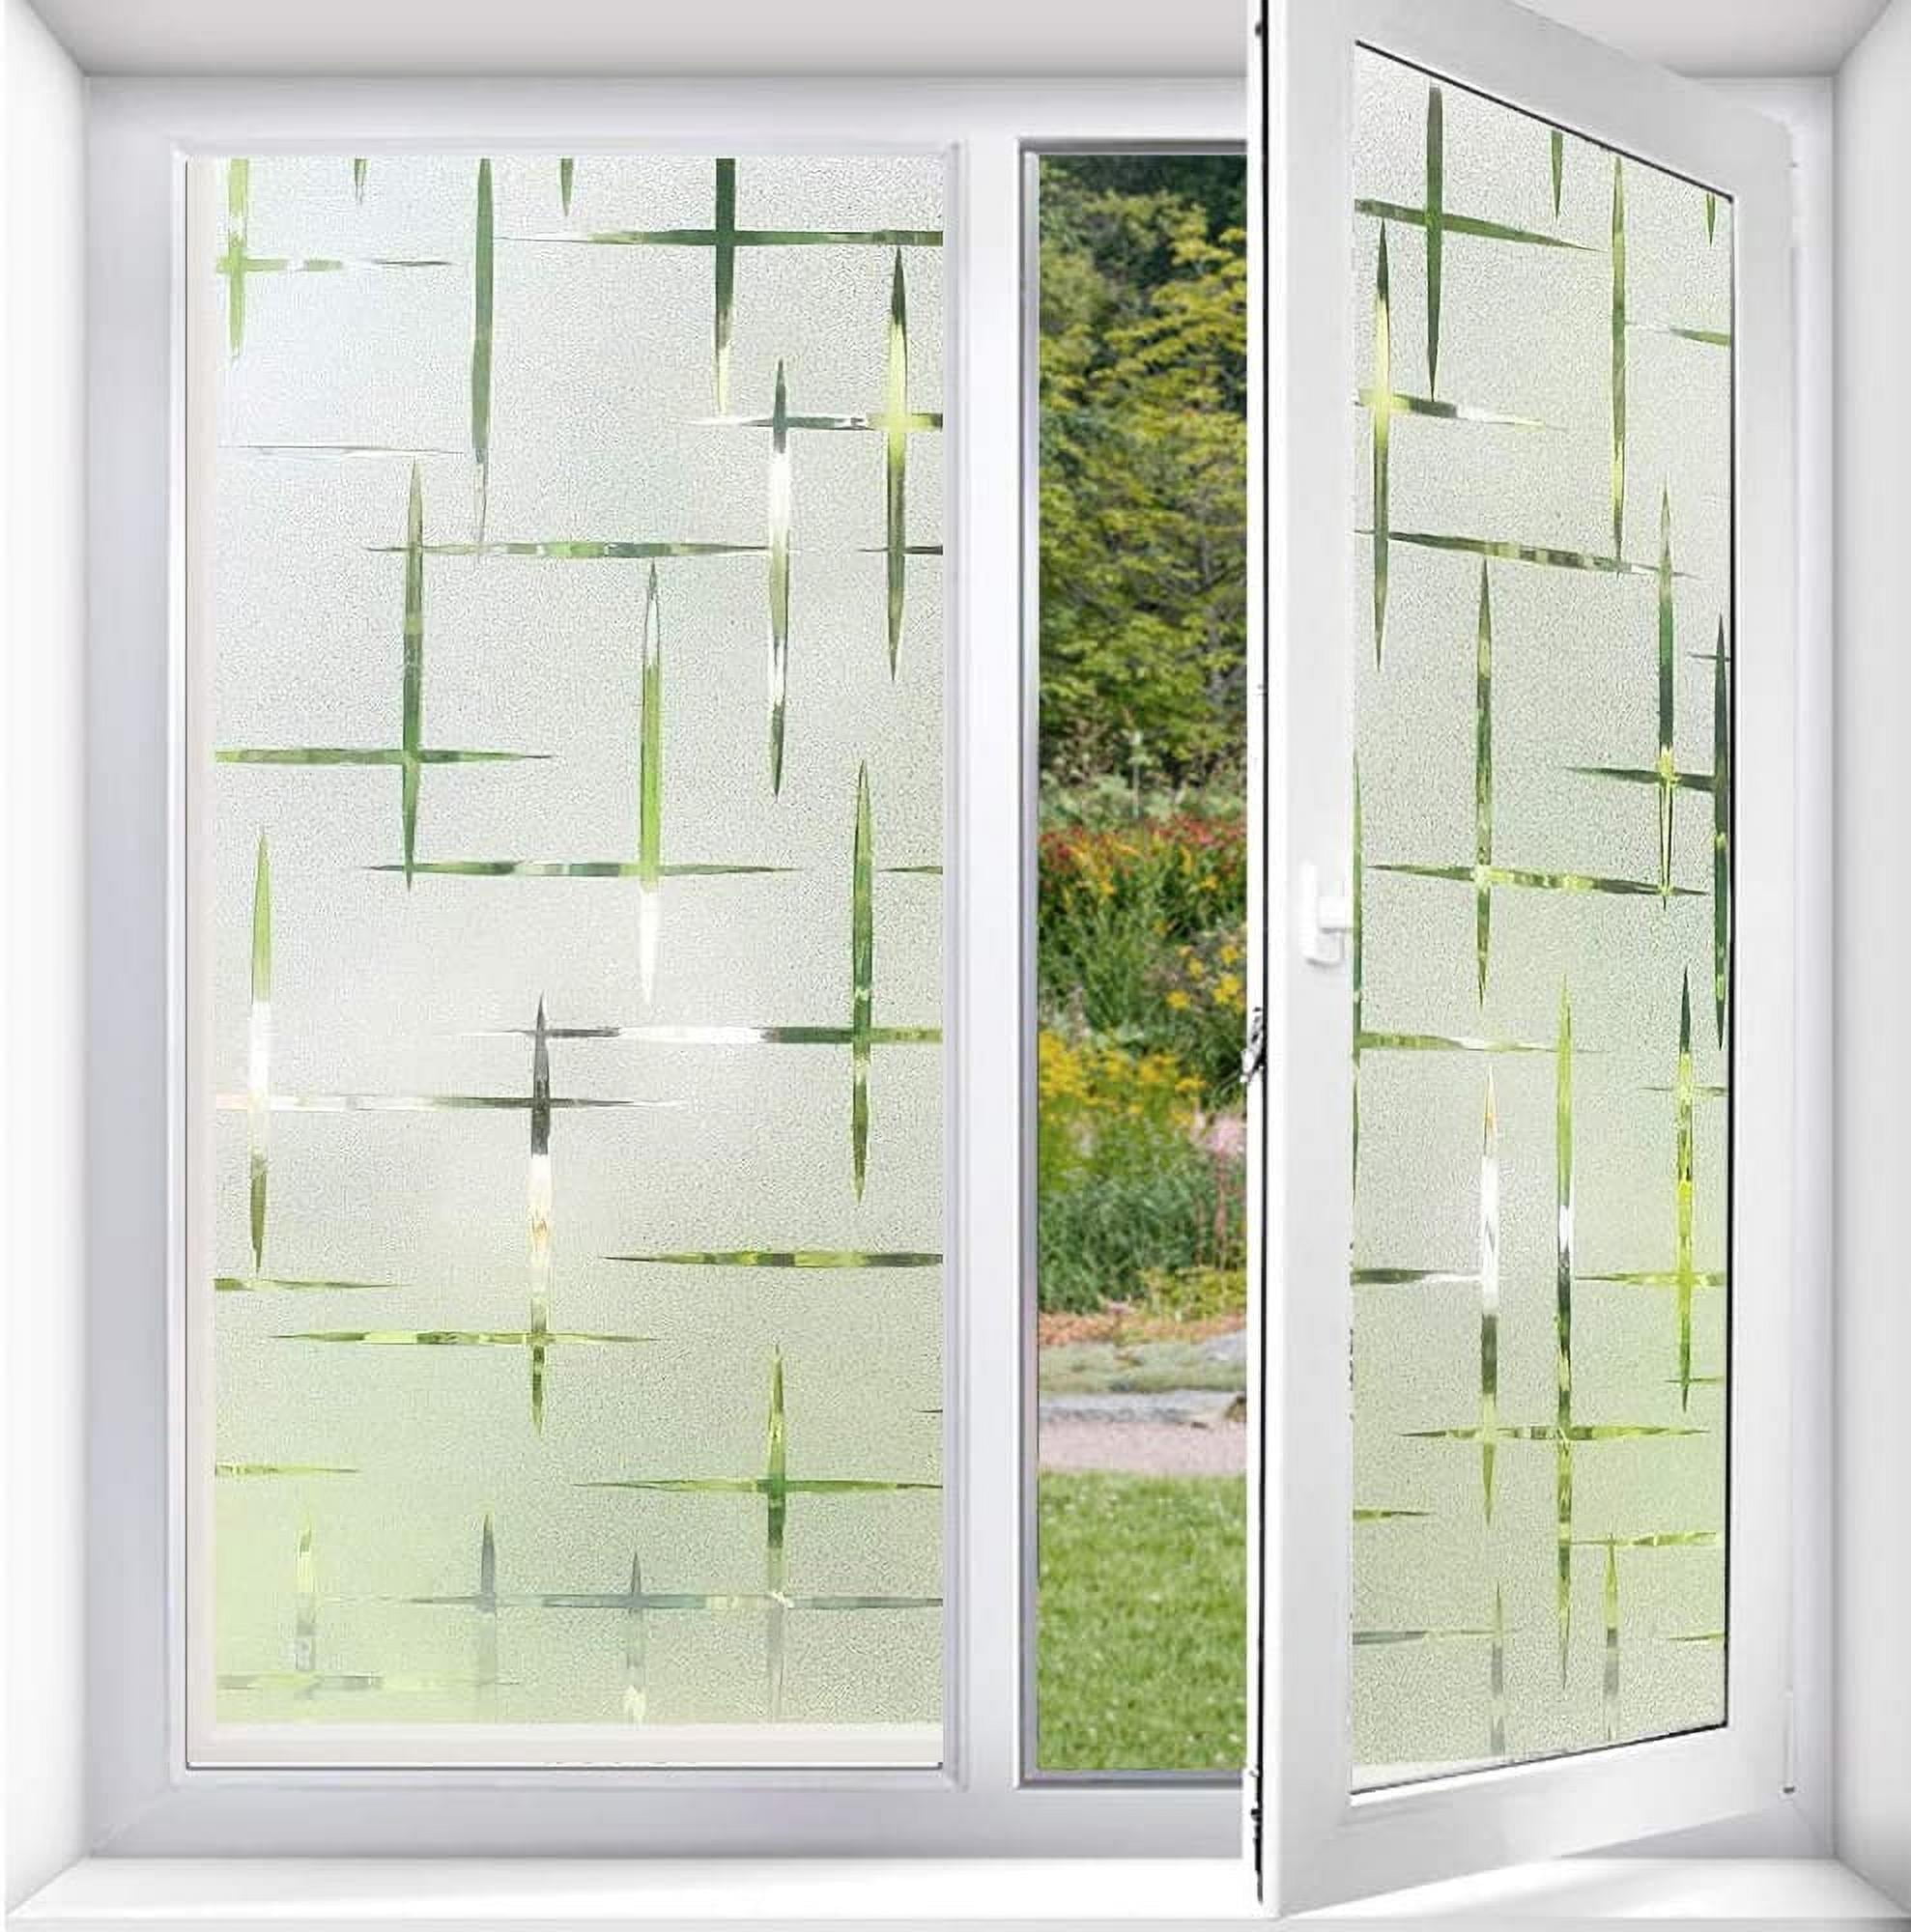 Decorative Patterned Window Film inc Frosted Glass Tint Sticky Back Plastic